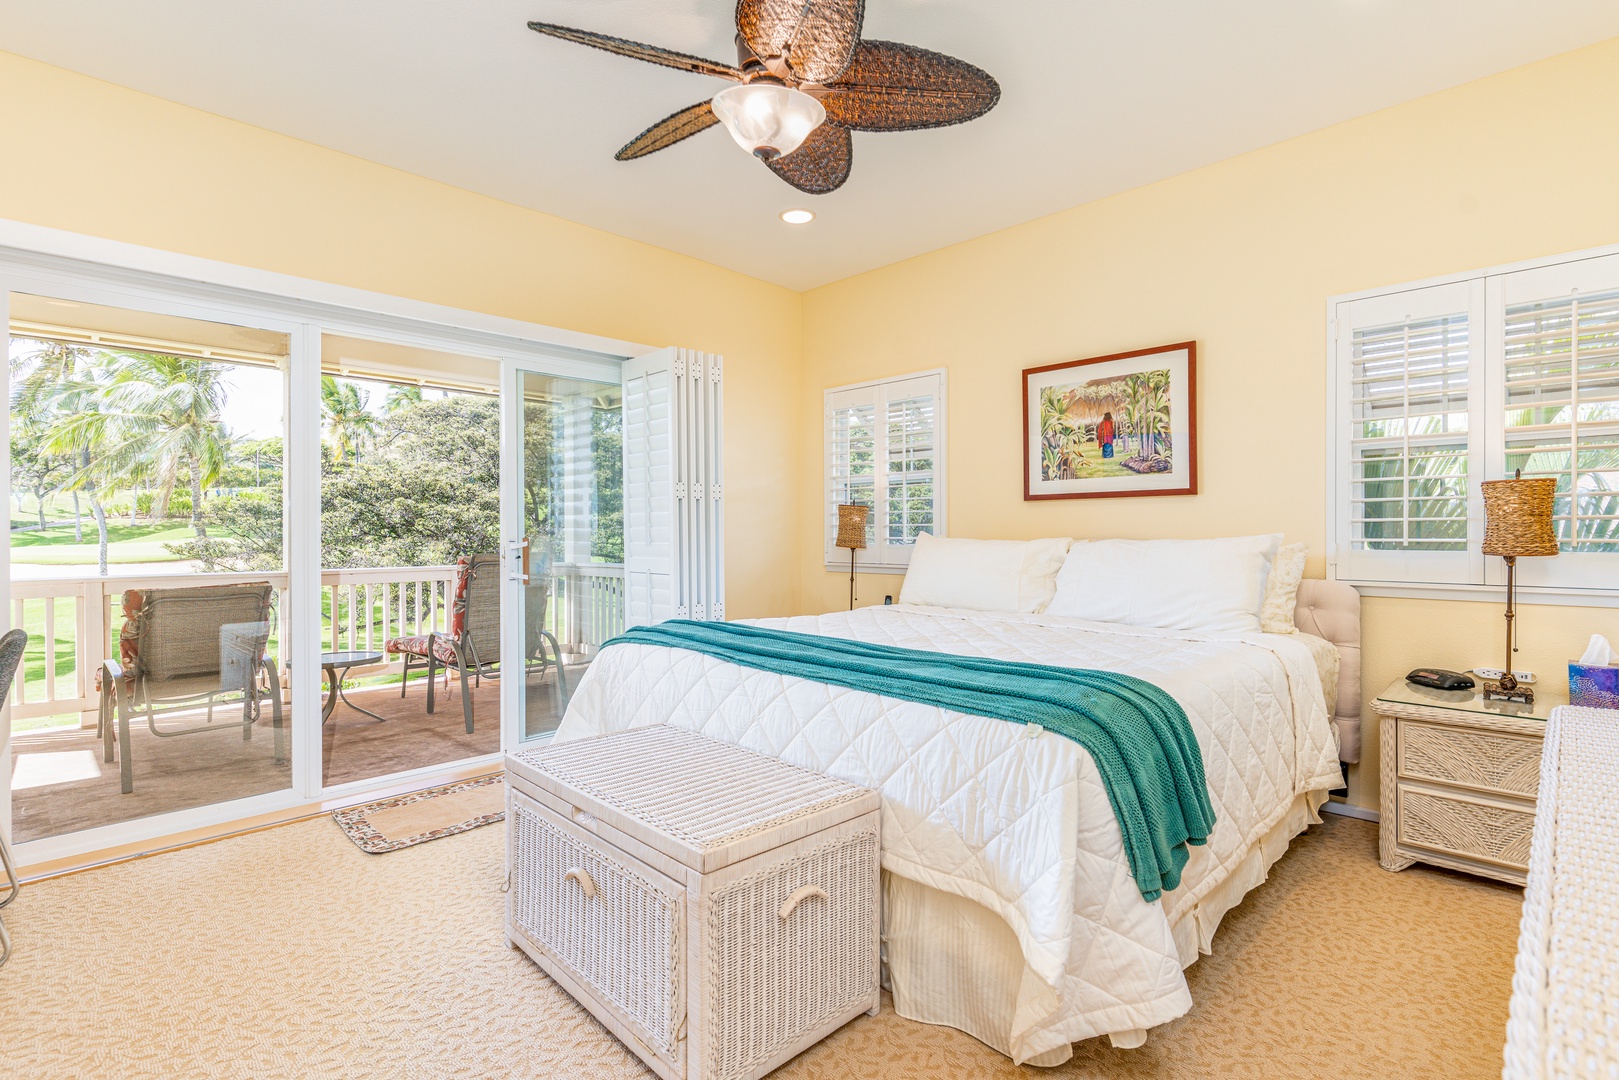 Kapolei Vacation Rentals, Coconut Plantation 1100-2 - The primary guest bedroom with access to the lanai.